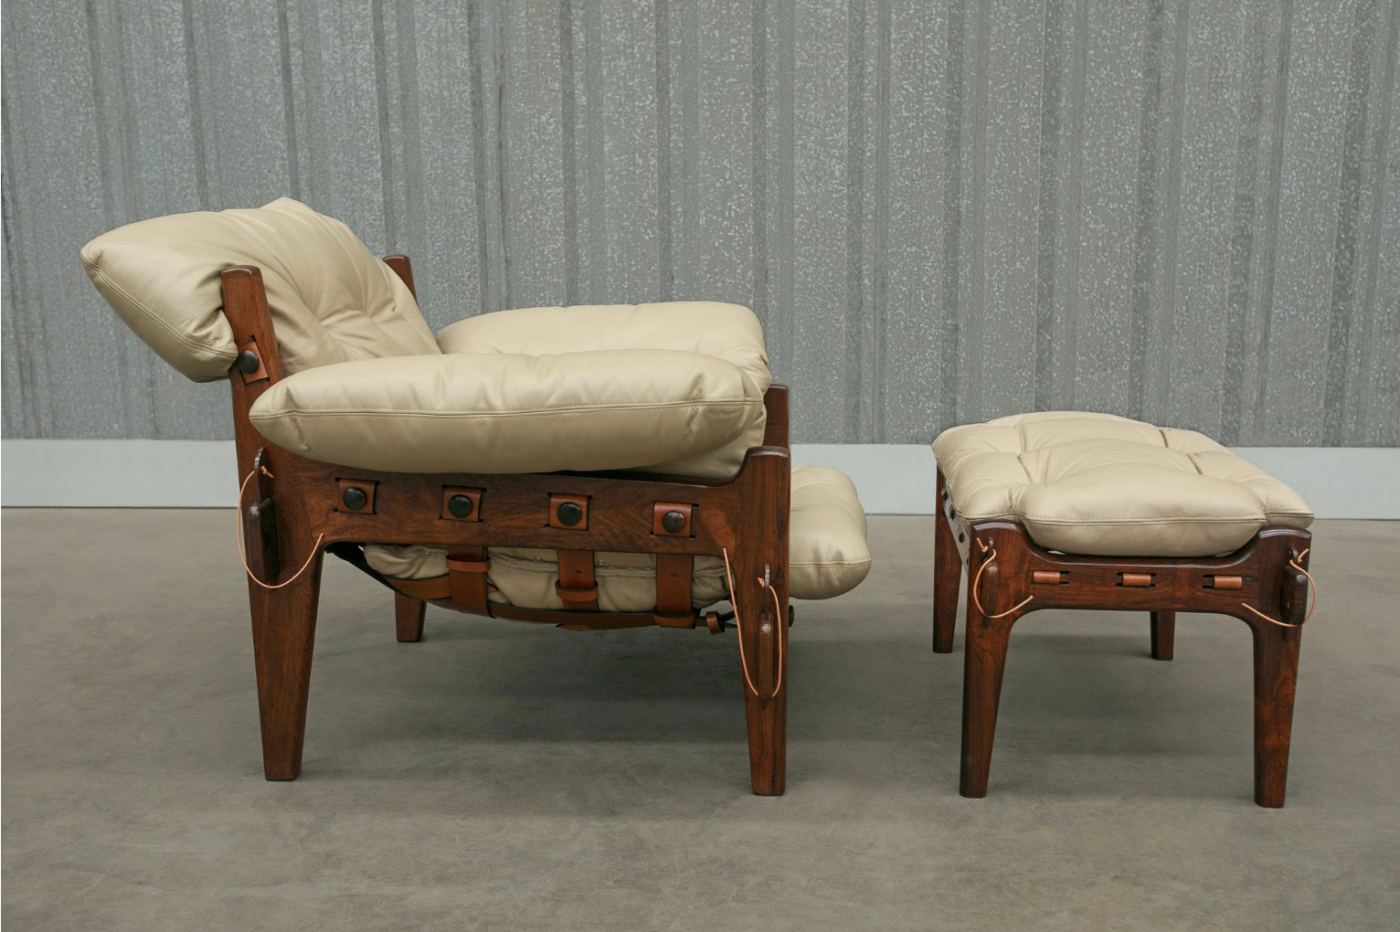 A 1963 SERGIO RODRIGUES Moleca armchair and footstool